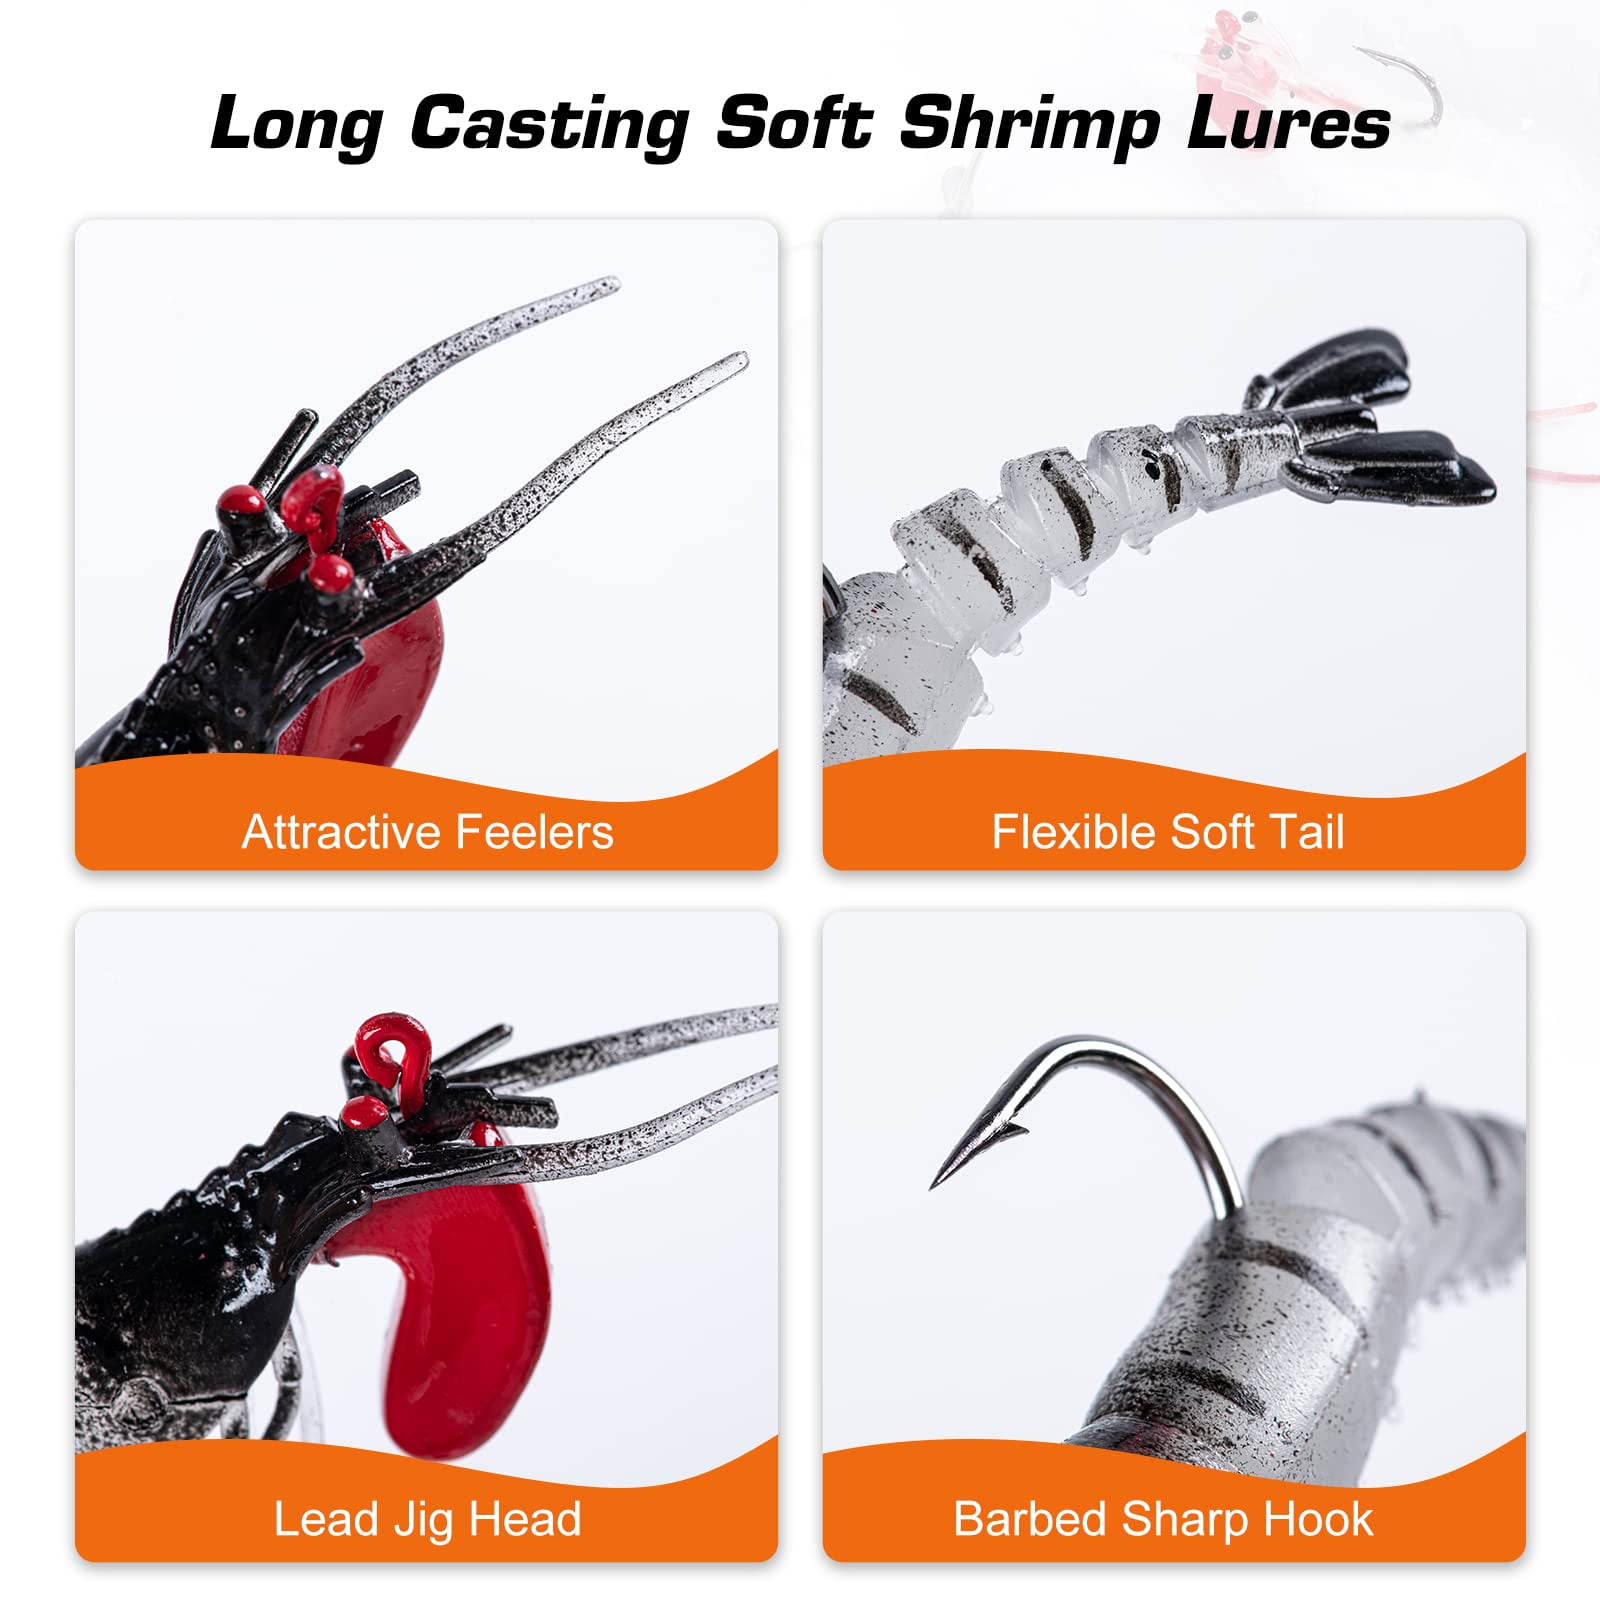 Goture Soft Shrimp Lures Fishing Popular Bait for Freshwater Fish and Bass  